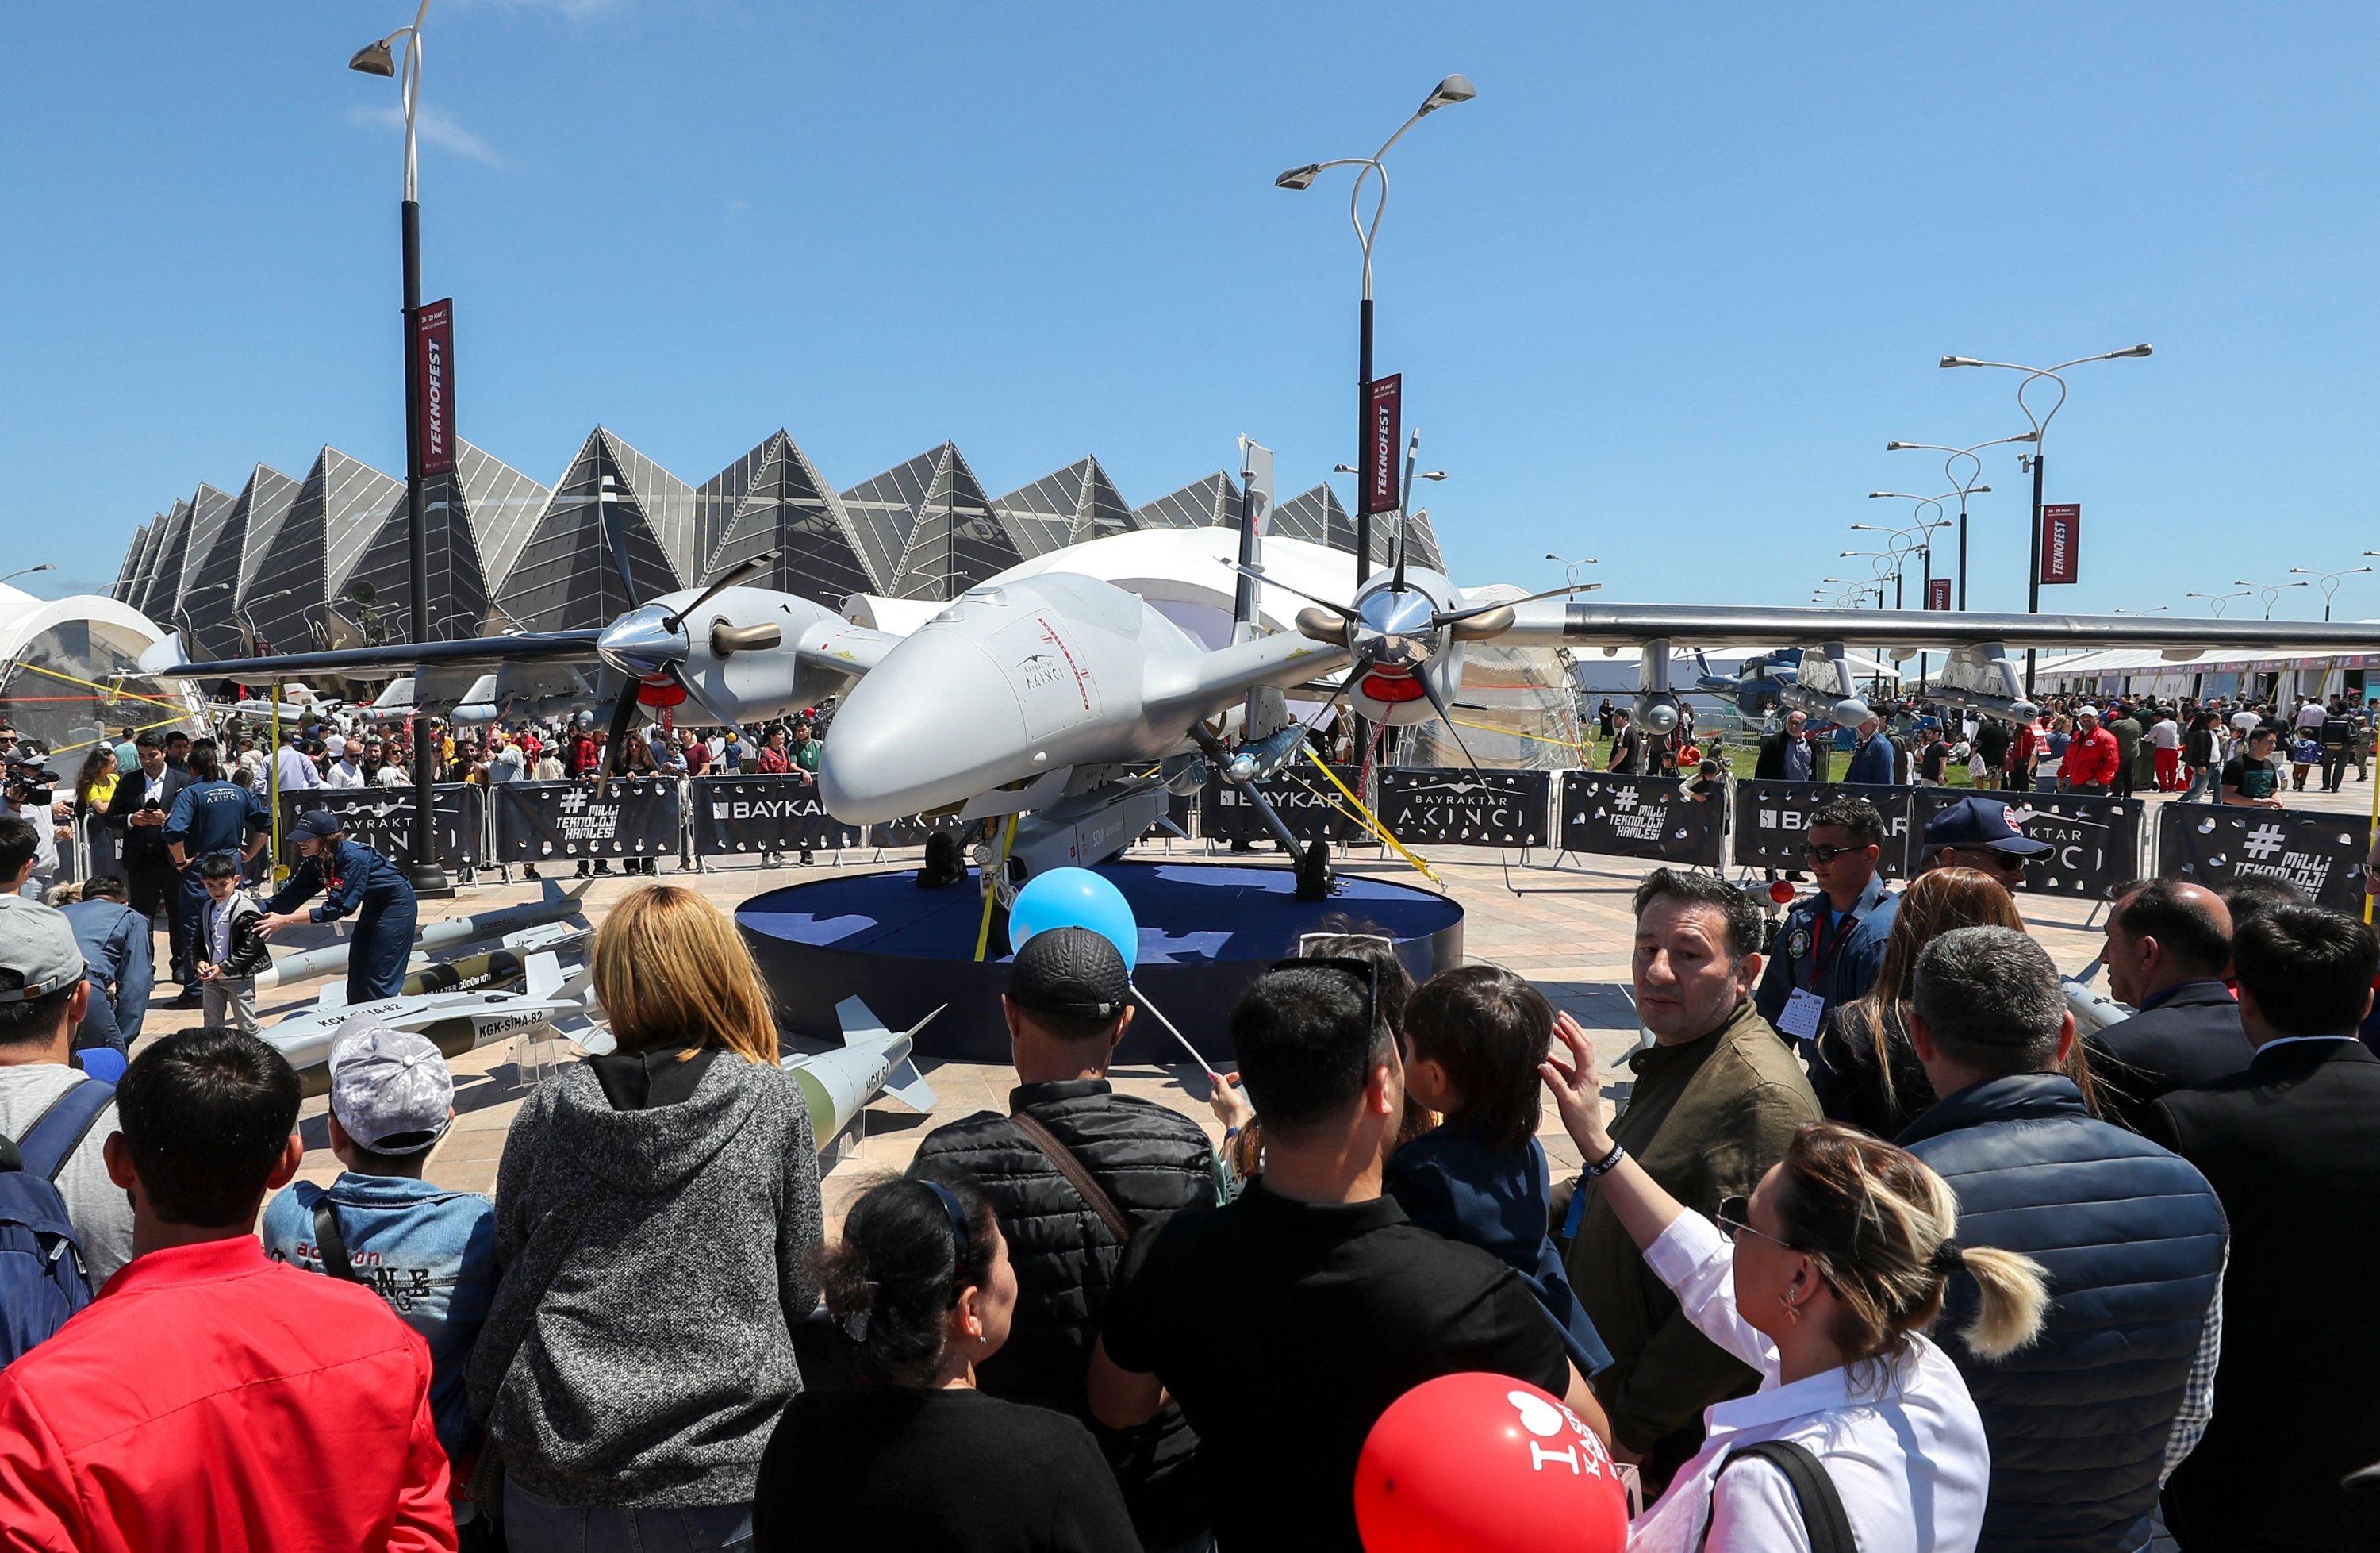 The Akıncı drone, manufactured by Turkey's Baykar, is presented during the aerospace and technology festival Teknofest, in the capital Baku, Azerbaijan, May 27, 2022. (AFP Photo)